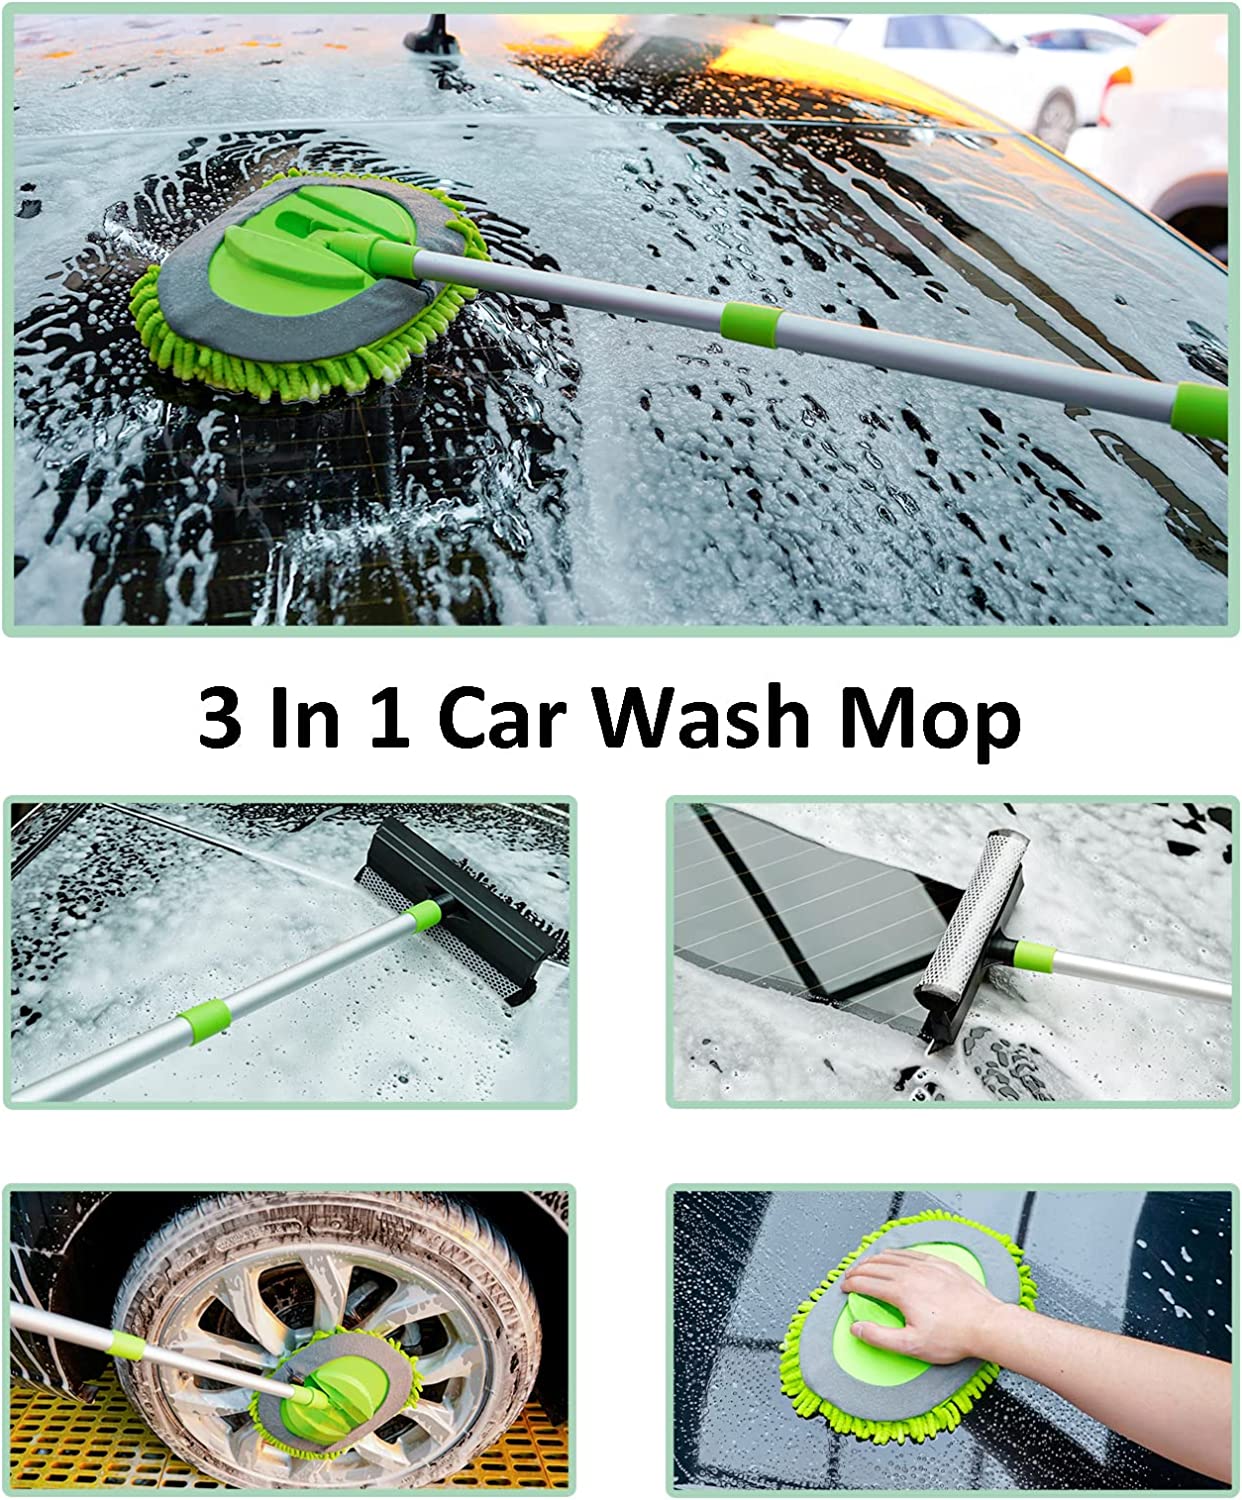 15pcs Car Cleaning Kit, Car Wash Brush Mop with 43" Long Handle, Chenille Microfiber Mitt, Extendable Long Pole Window Water Scraper for Interior and Exterior Car Detailing Kit